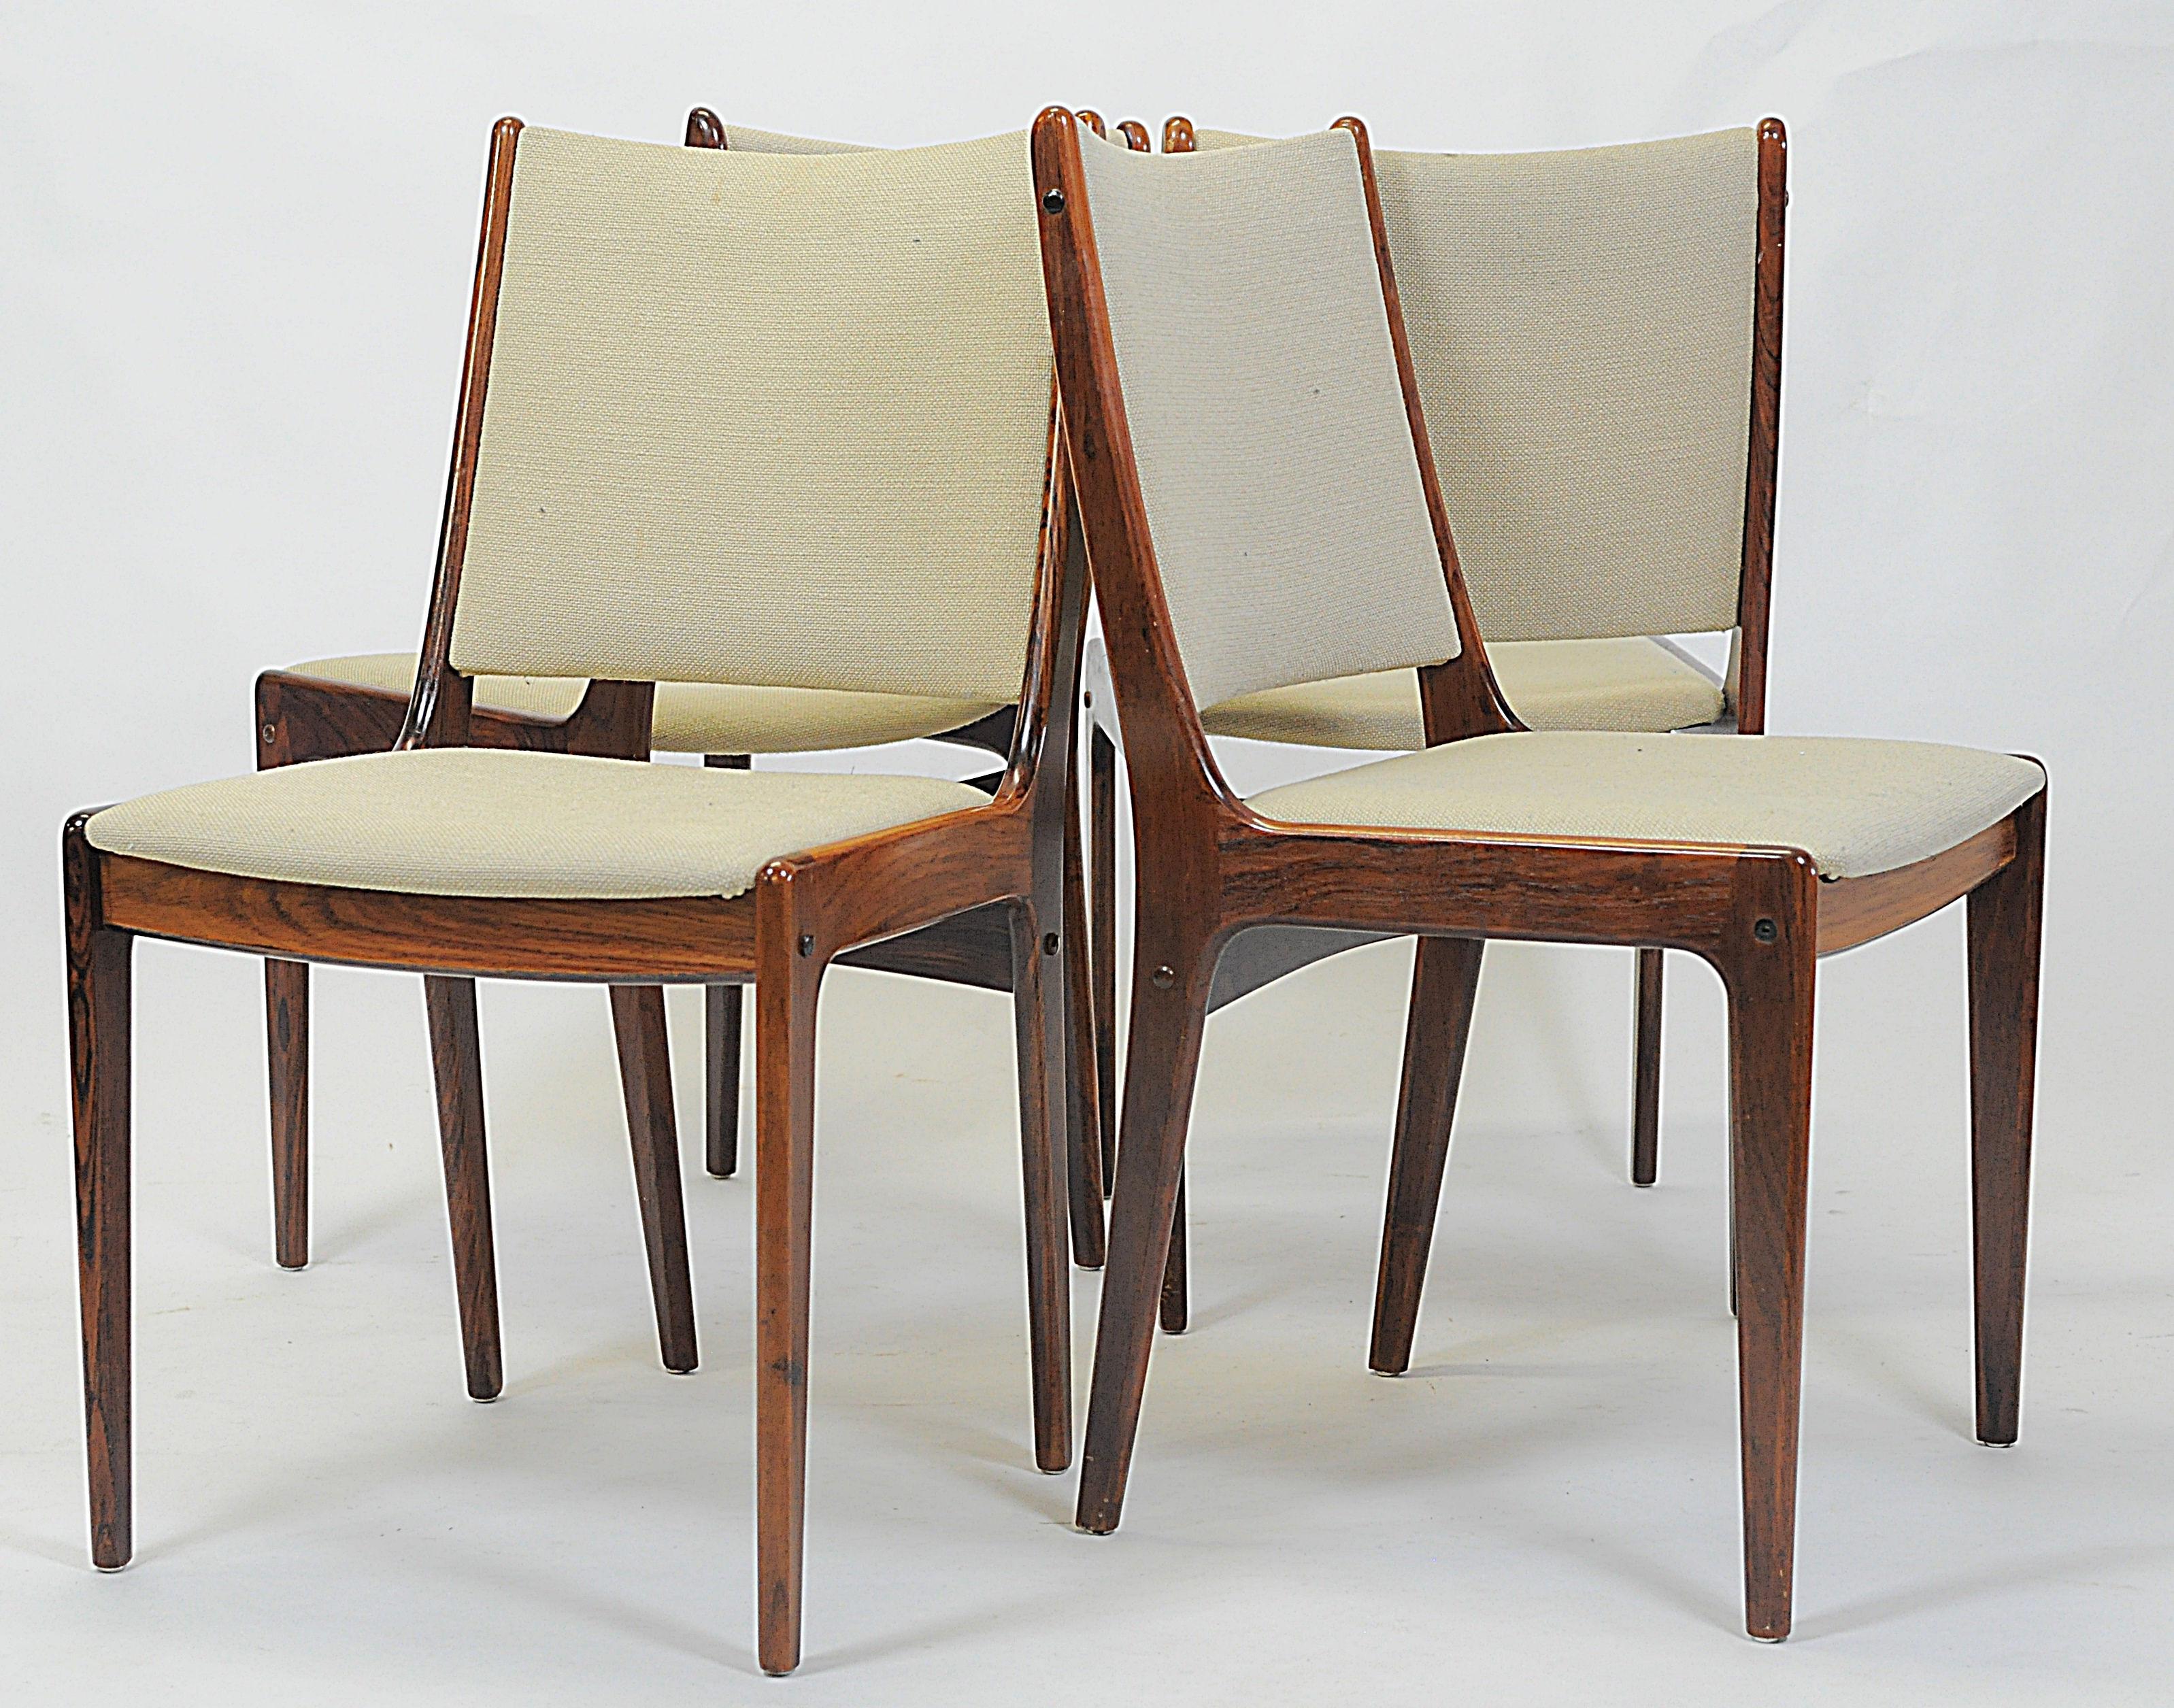 Eight Johannes Andersen Restored Rosewood Dining Chairs Reupholstery Included In Good Condition For Sale In Knebel, DK